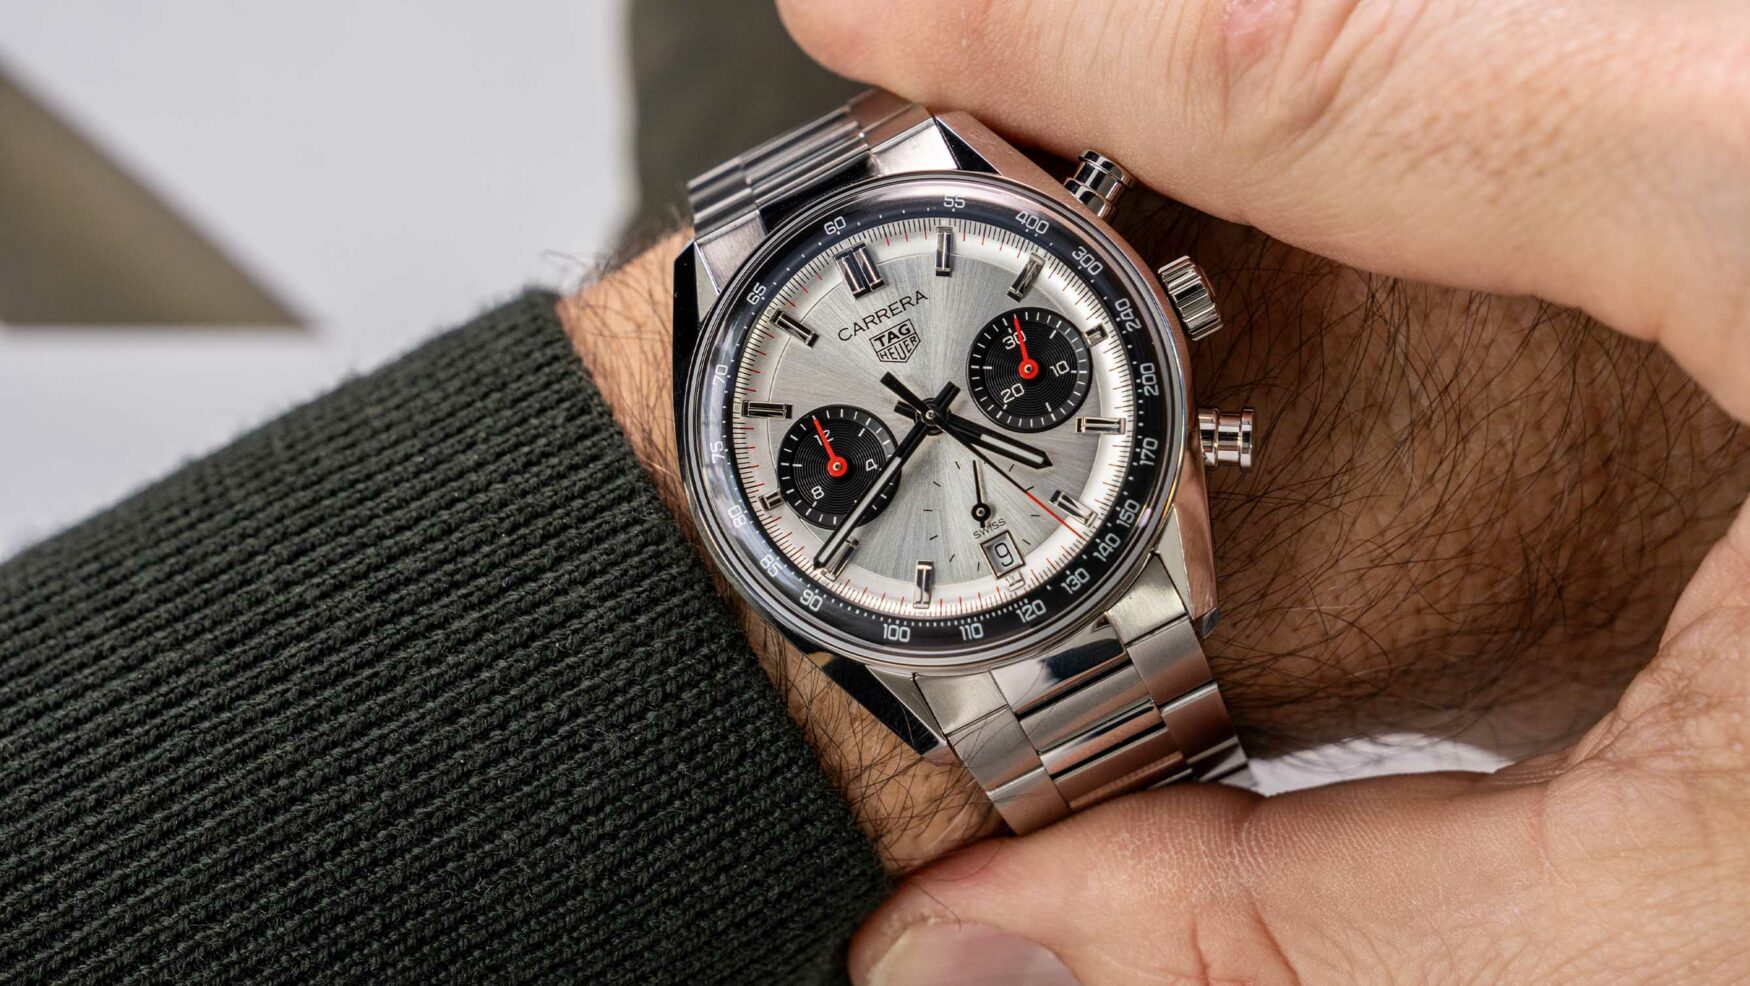 The TAG Heuer Carrera Chronograph Glassbox Panda leans into its vintage cues